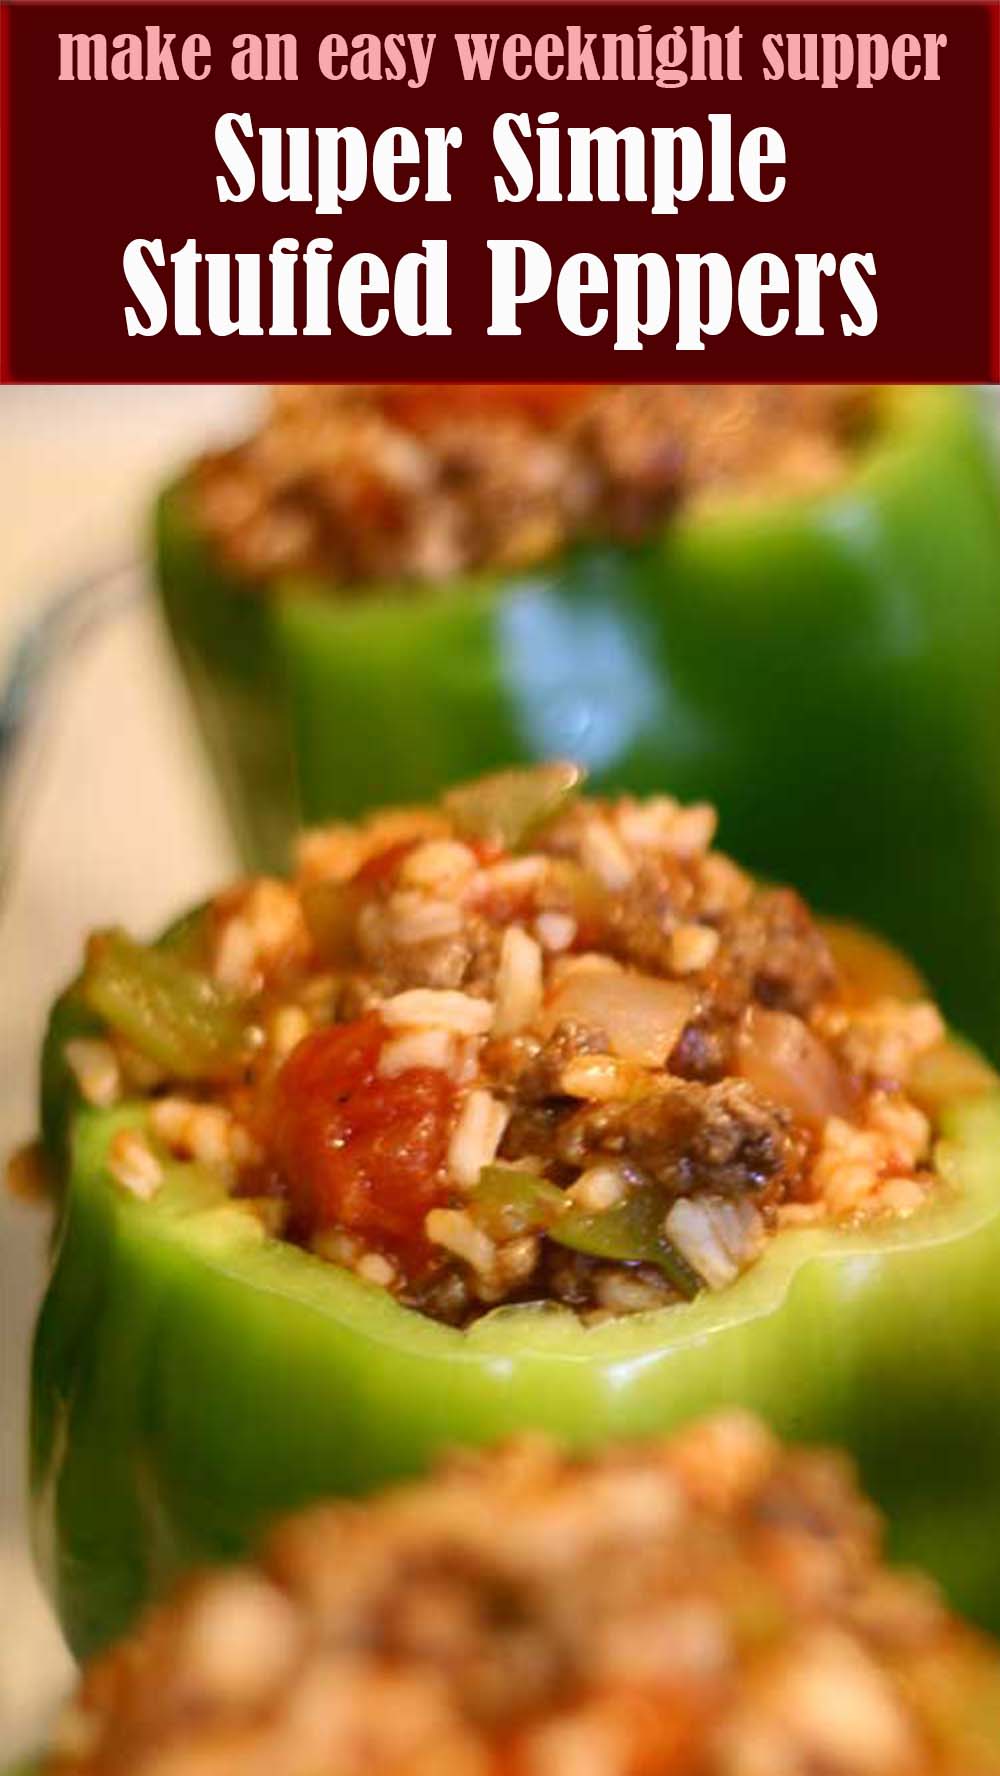 Super Simple Stuffed Peppers